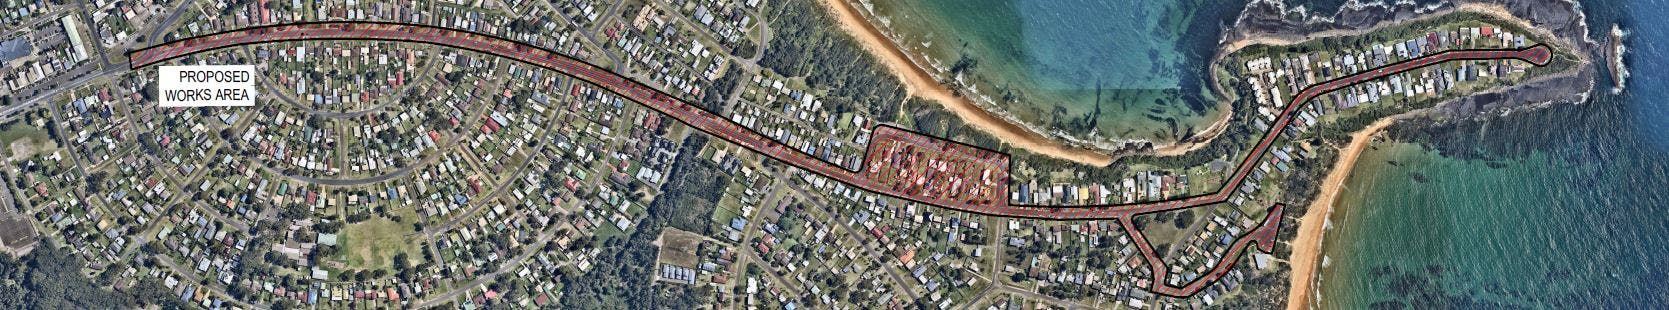 Culburra aerial view of proposed works